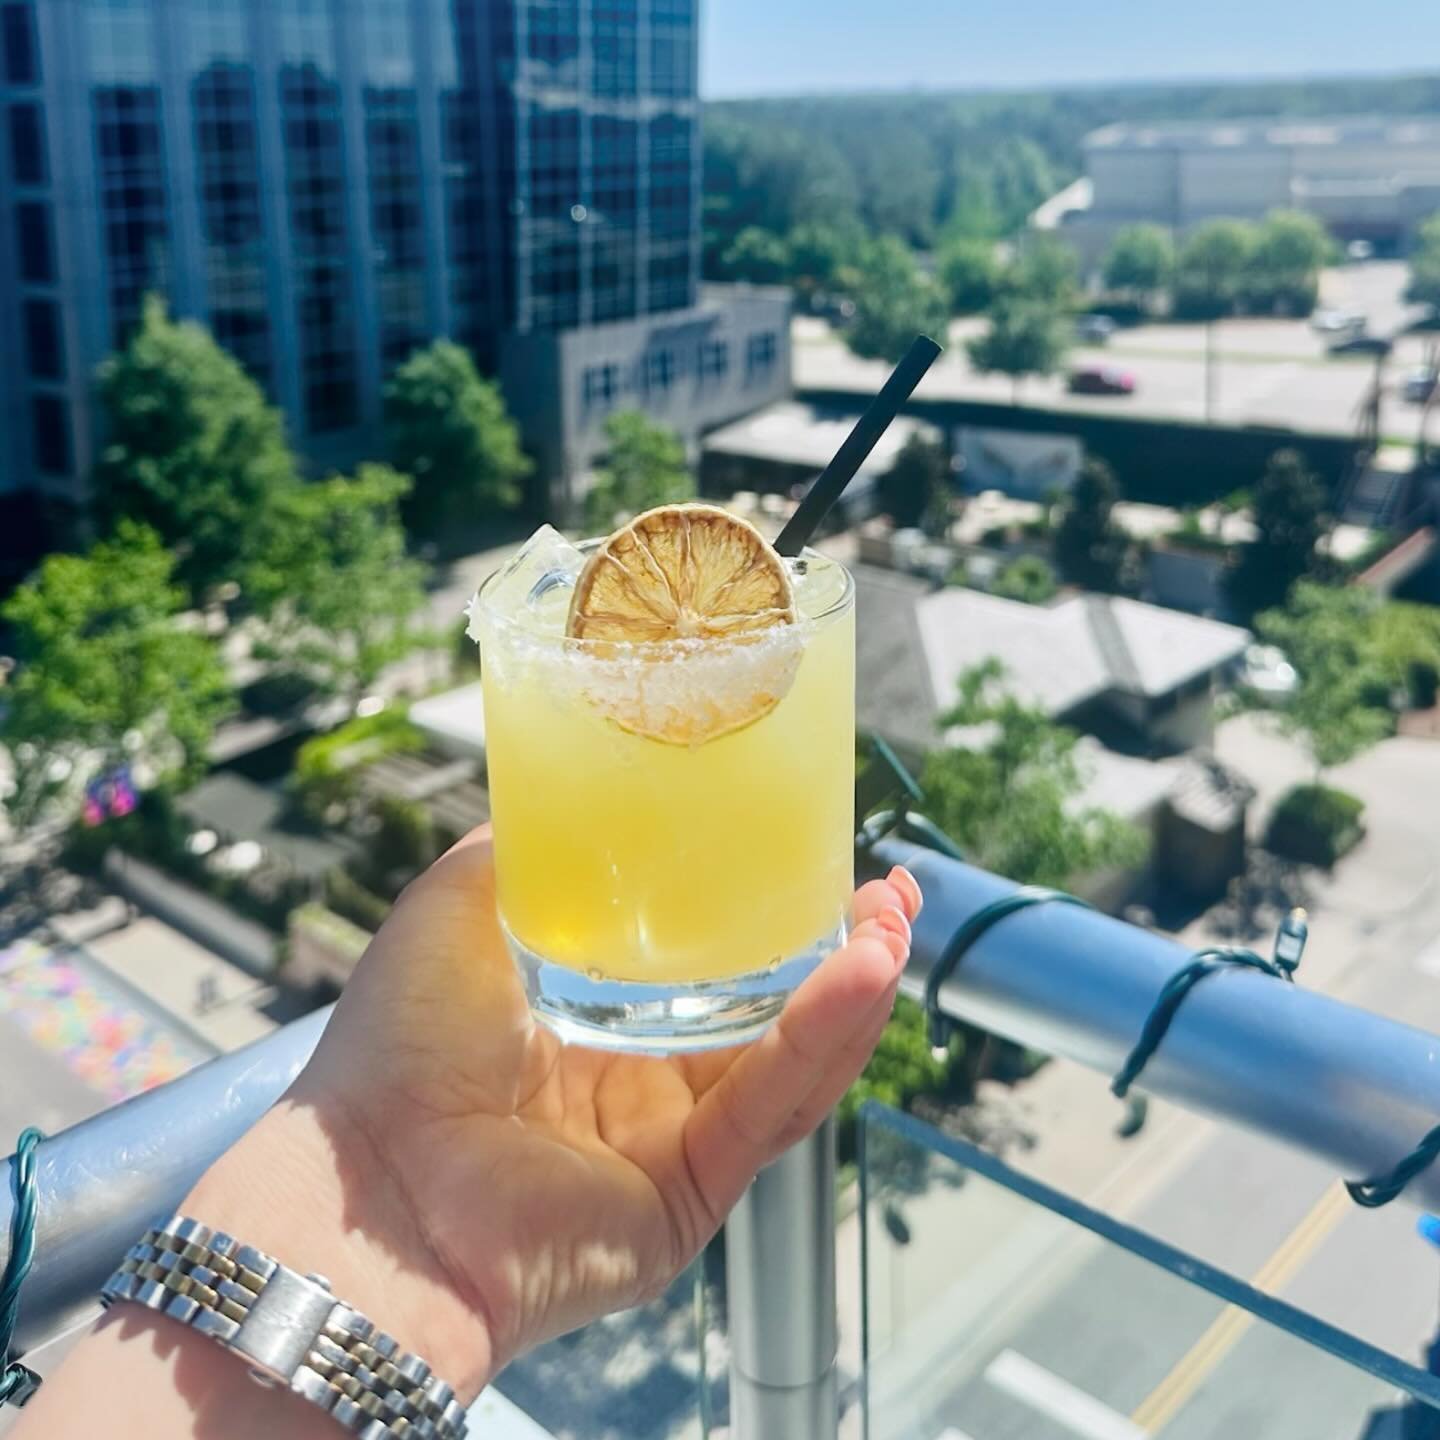 HAPPY CINCO DE MAYO 🌮

Join us today from 2:30-5:30 on the 7th floor of @achotelraleigh 

We&rsquo;ll have ::
🍹HOUSE MARGARITA $12.00
🌮3 TACOS FOR $8.00 (Carne Asada tacos
Chicken Al pastor Tacos)
🌶️PLUS TORTILLA CHIPS, GUACAMOLE, QUESO DIP, AND 